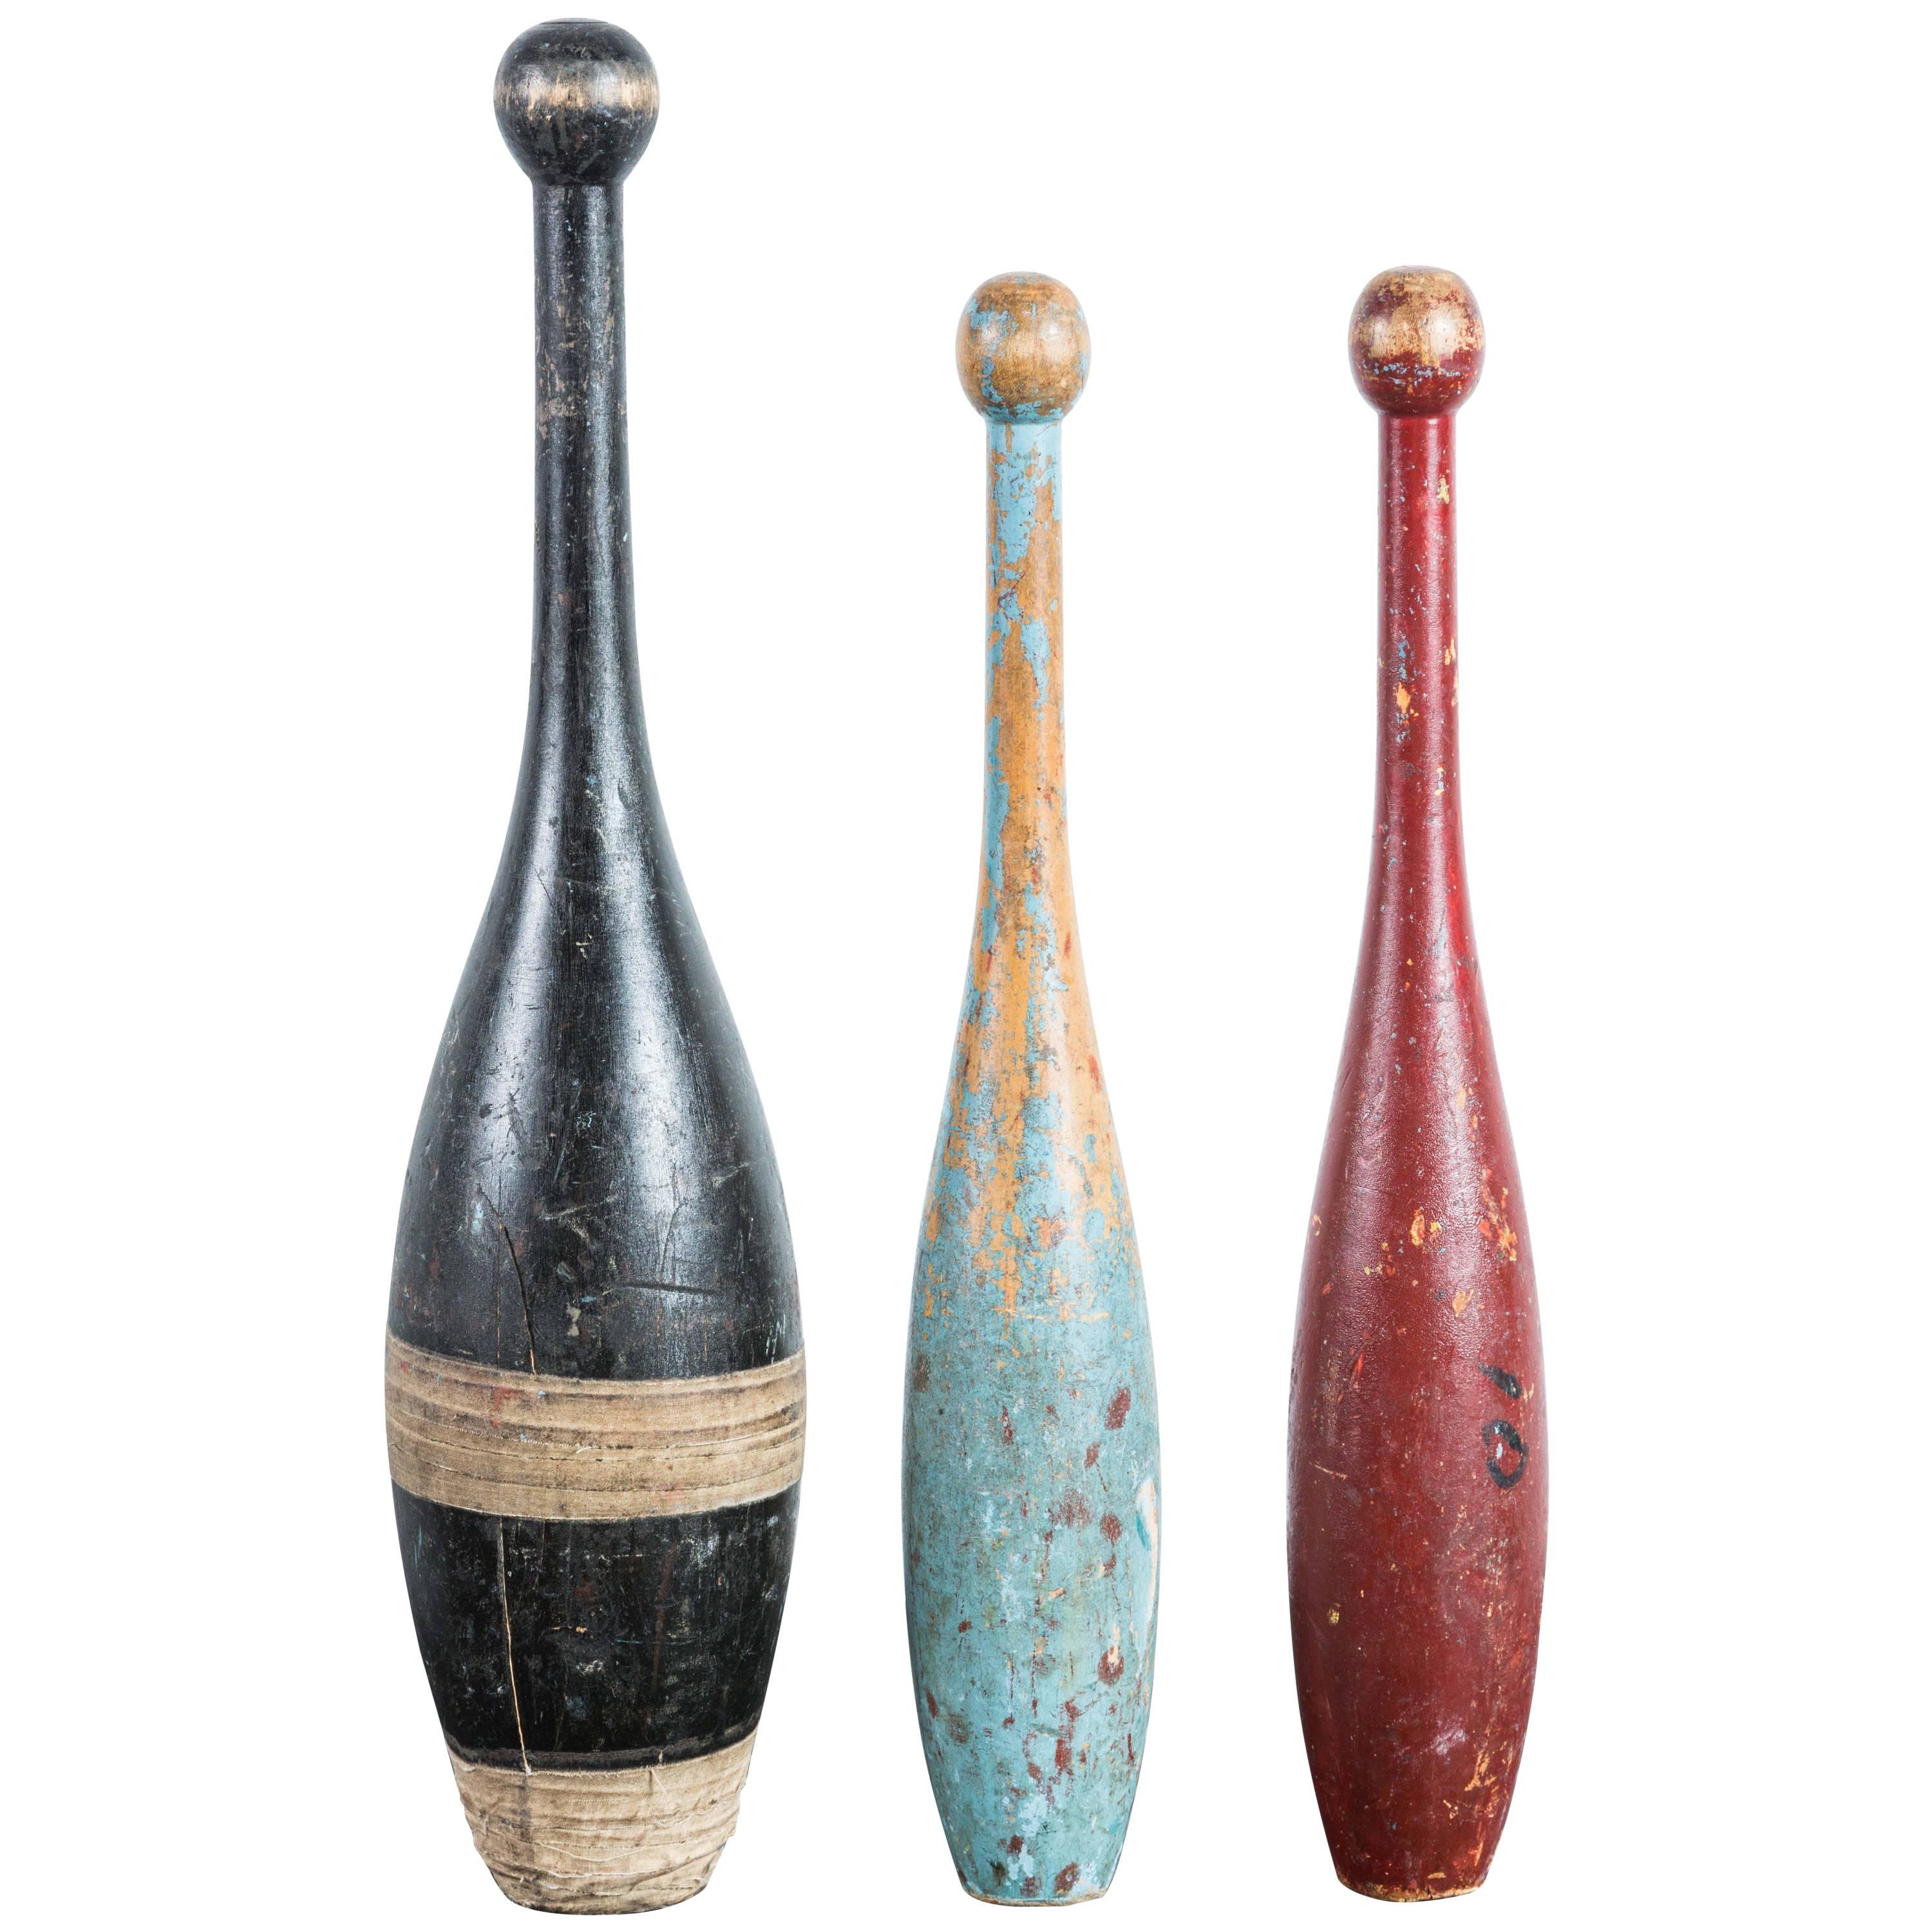 Trio of Early 20th Century Indian Clubs with Original Paint Surface